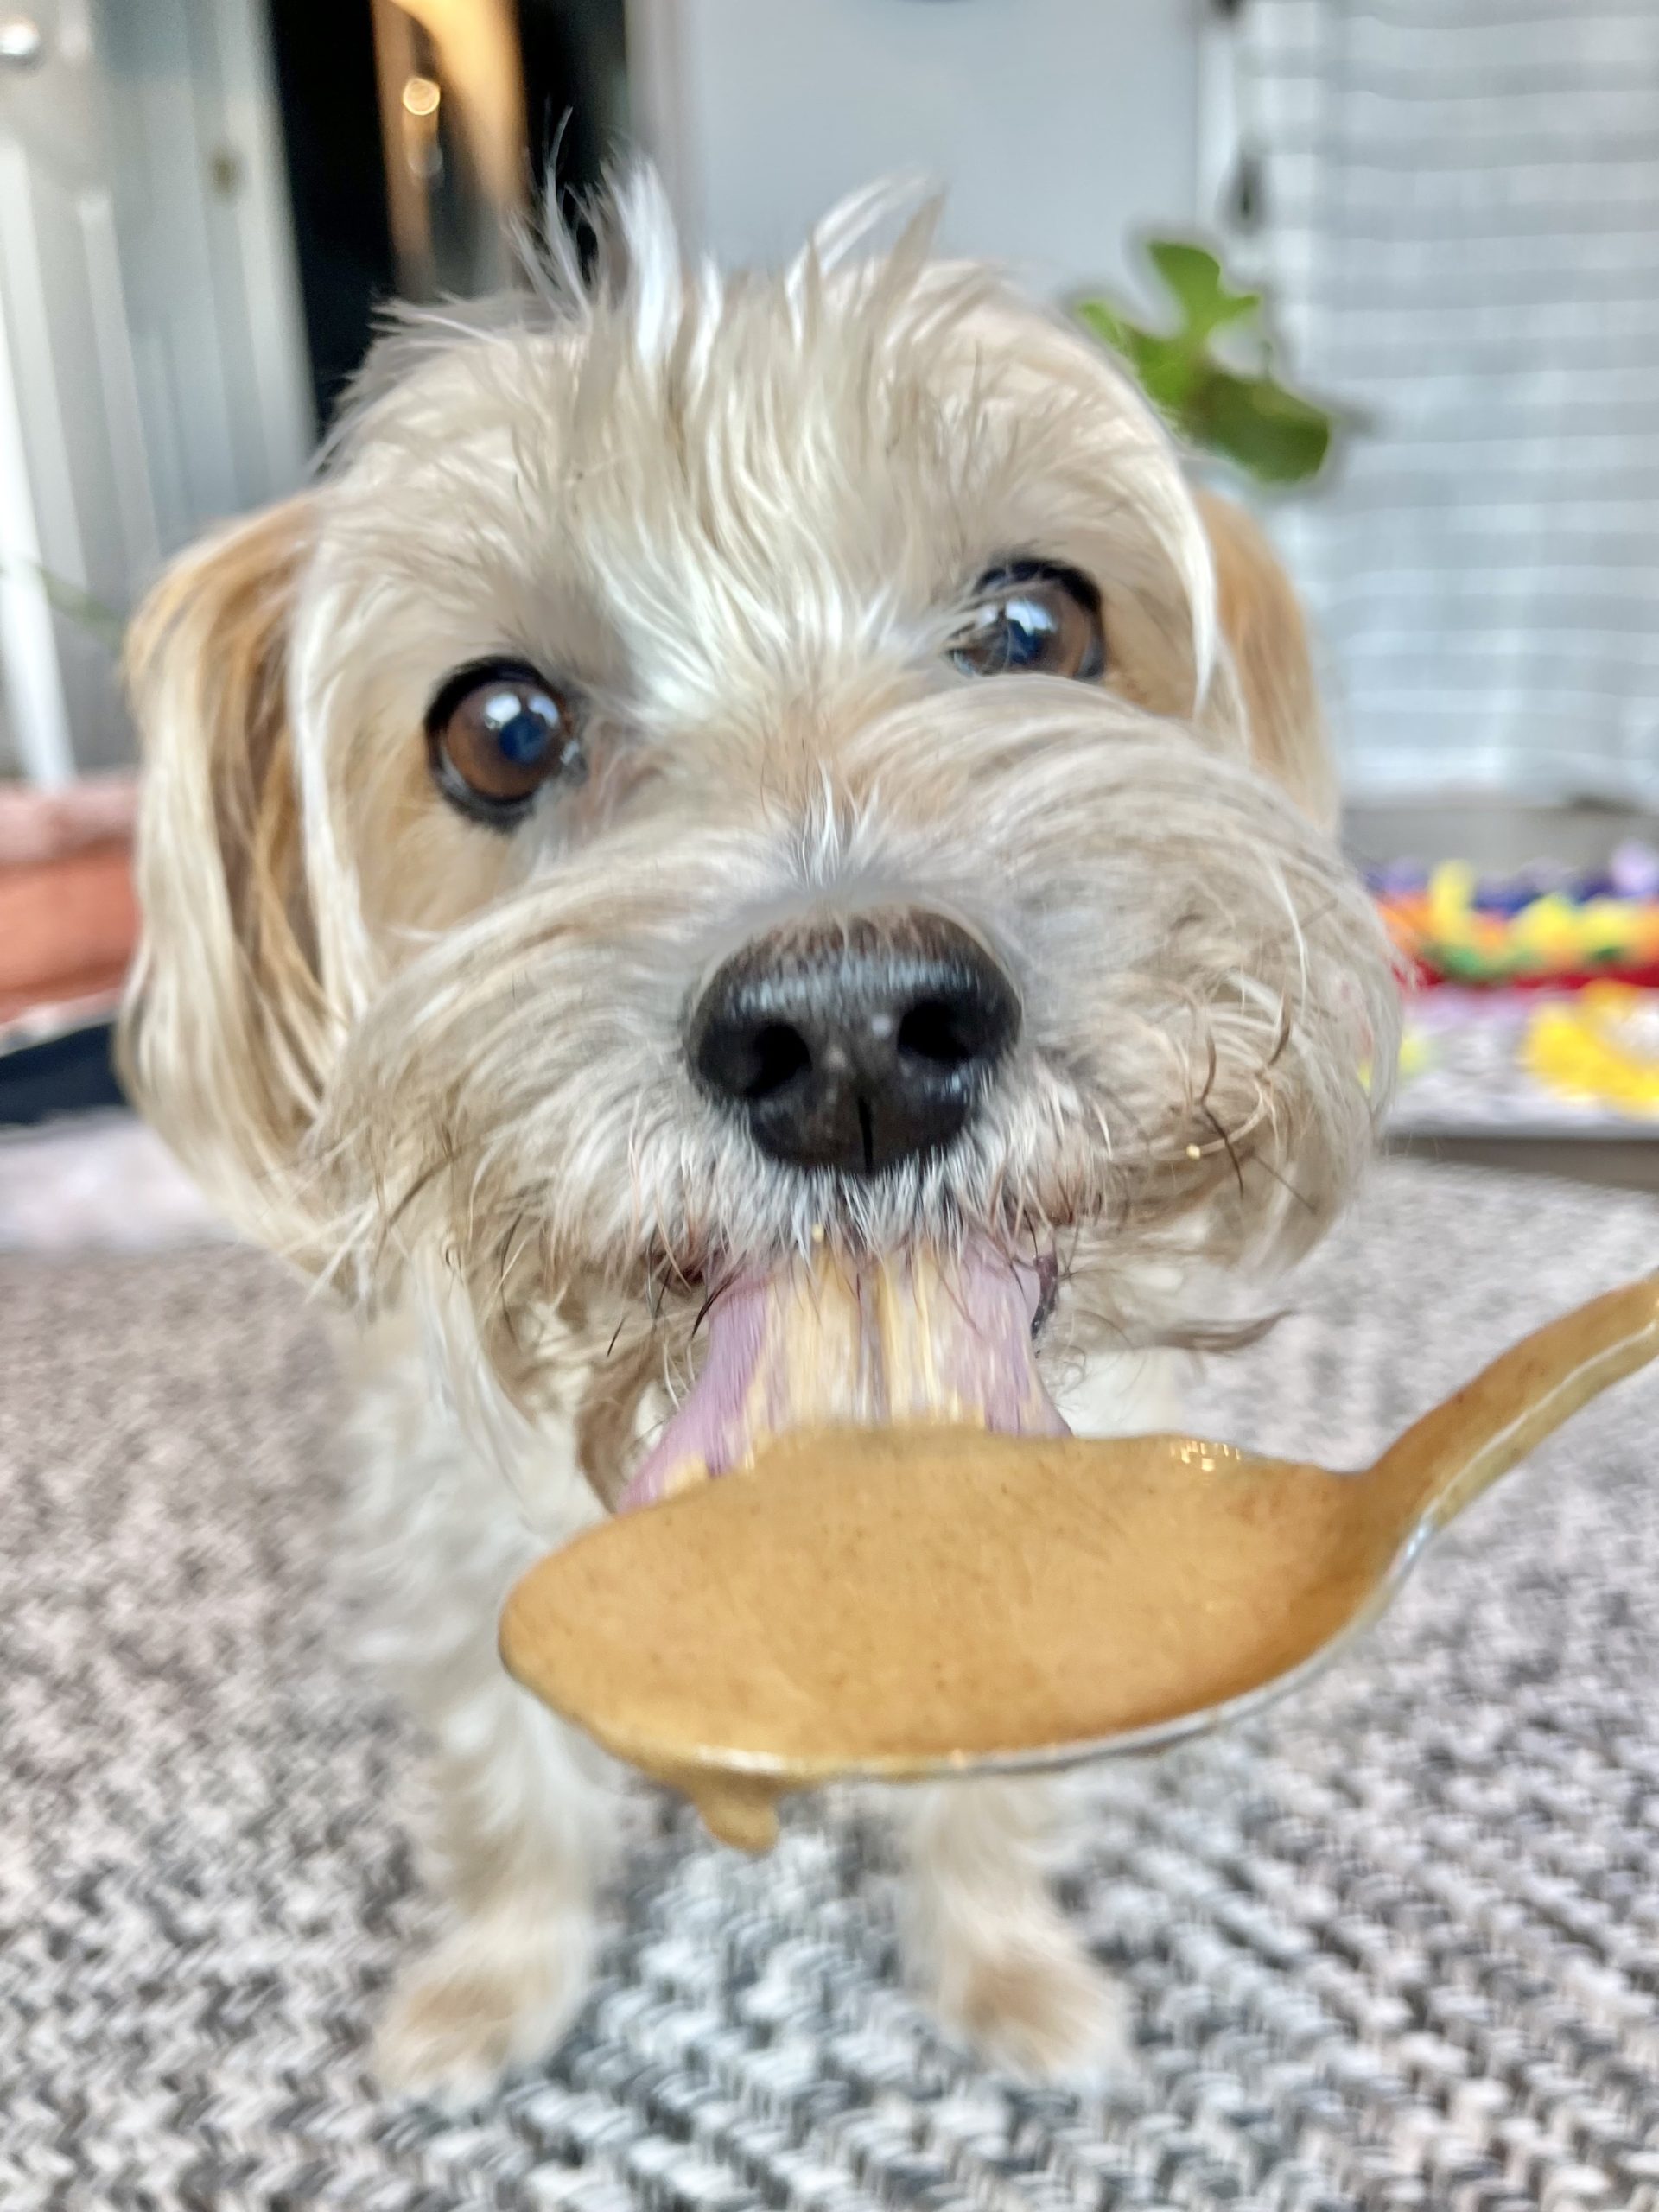 https://simplysharonandteddy.com/wp-content/uploads/2022/09/best-peanut-butter-brand-for-dogs-in-2022-that-are-safe-and-healthy-3-scaled.jpg